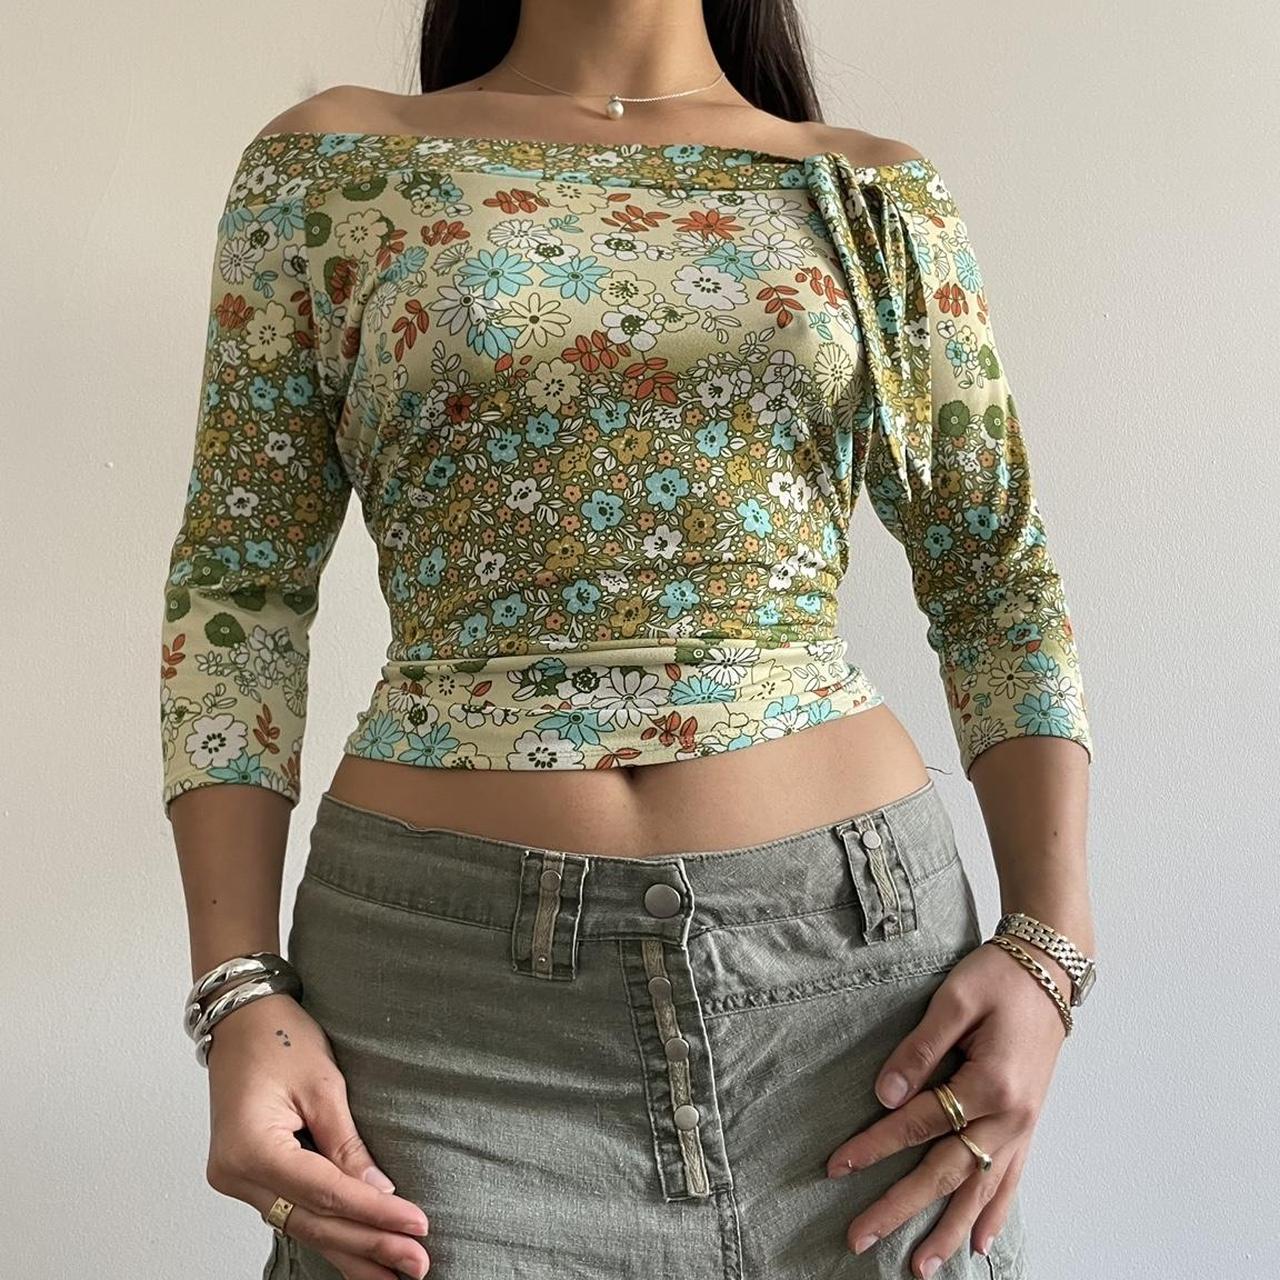 Women's Green and Yellow Blouse | Depop